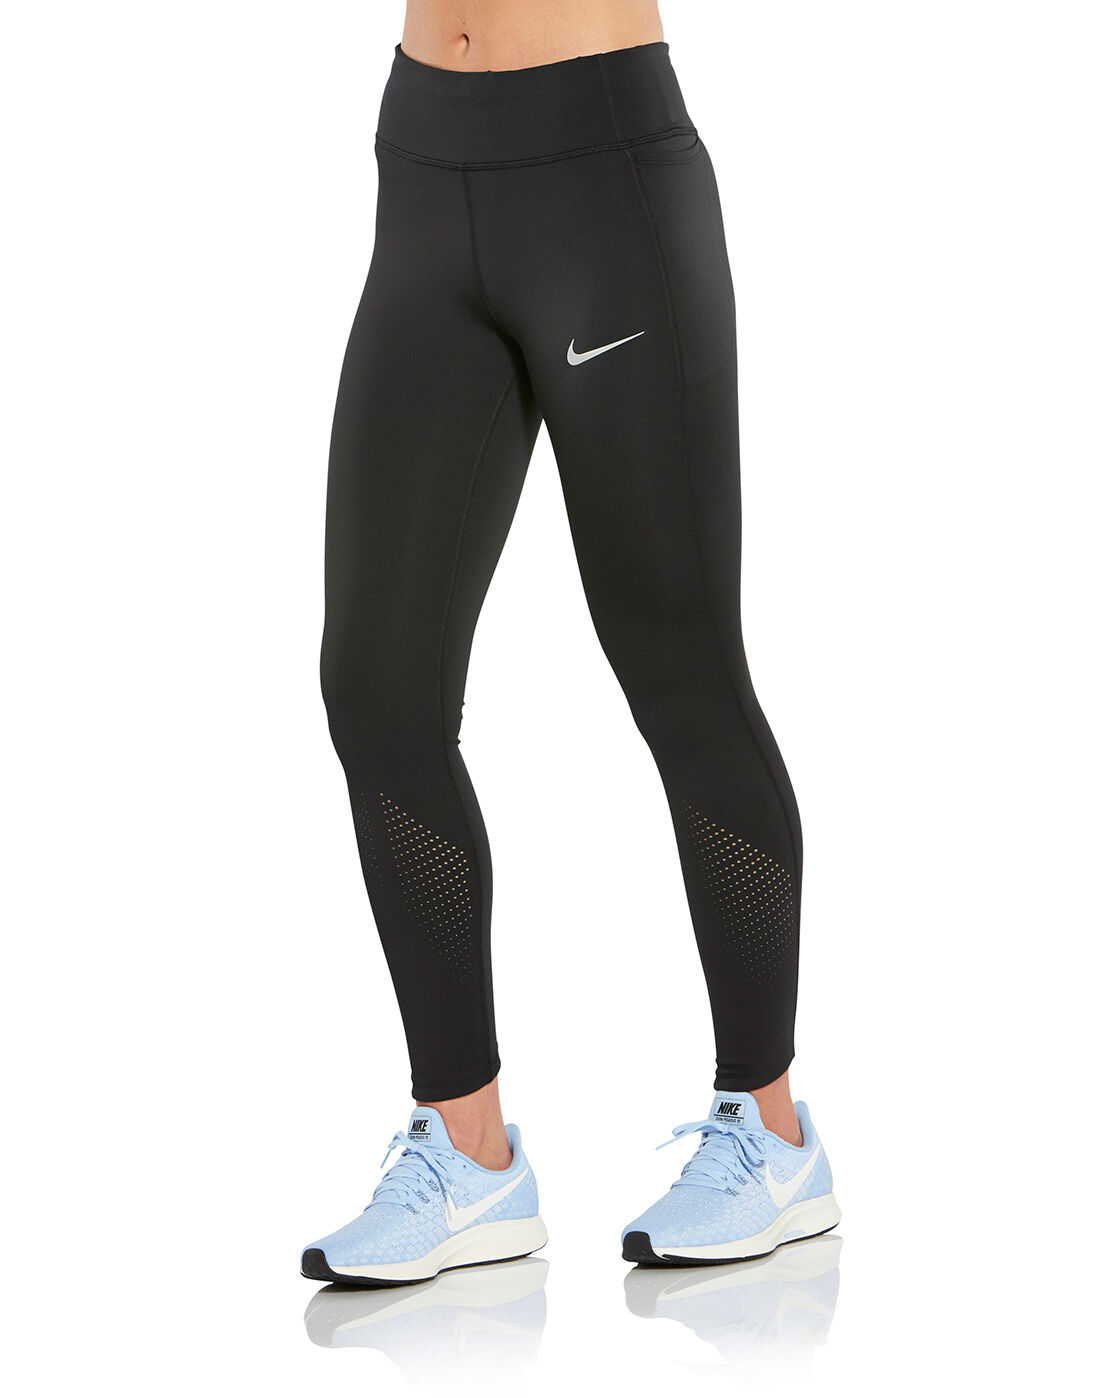 nike women's epic lux tights